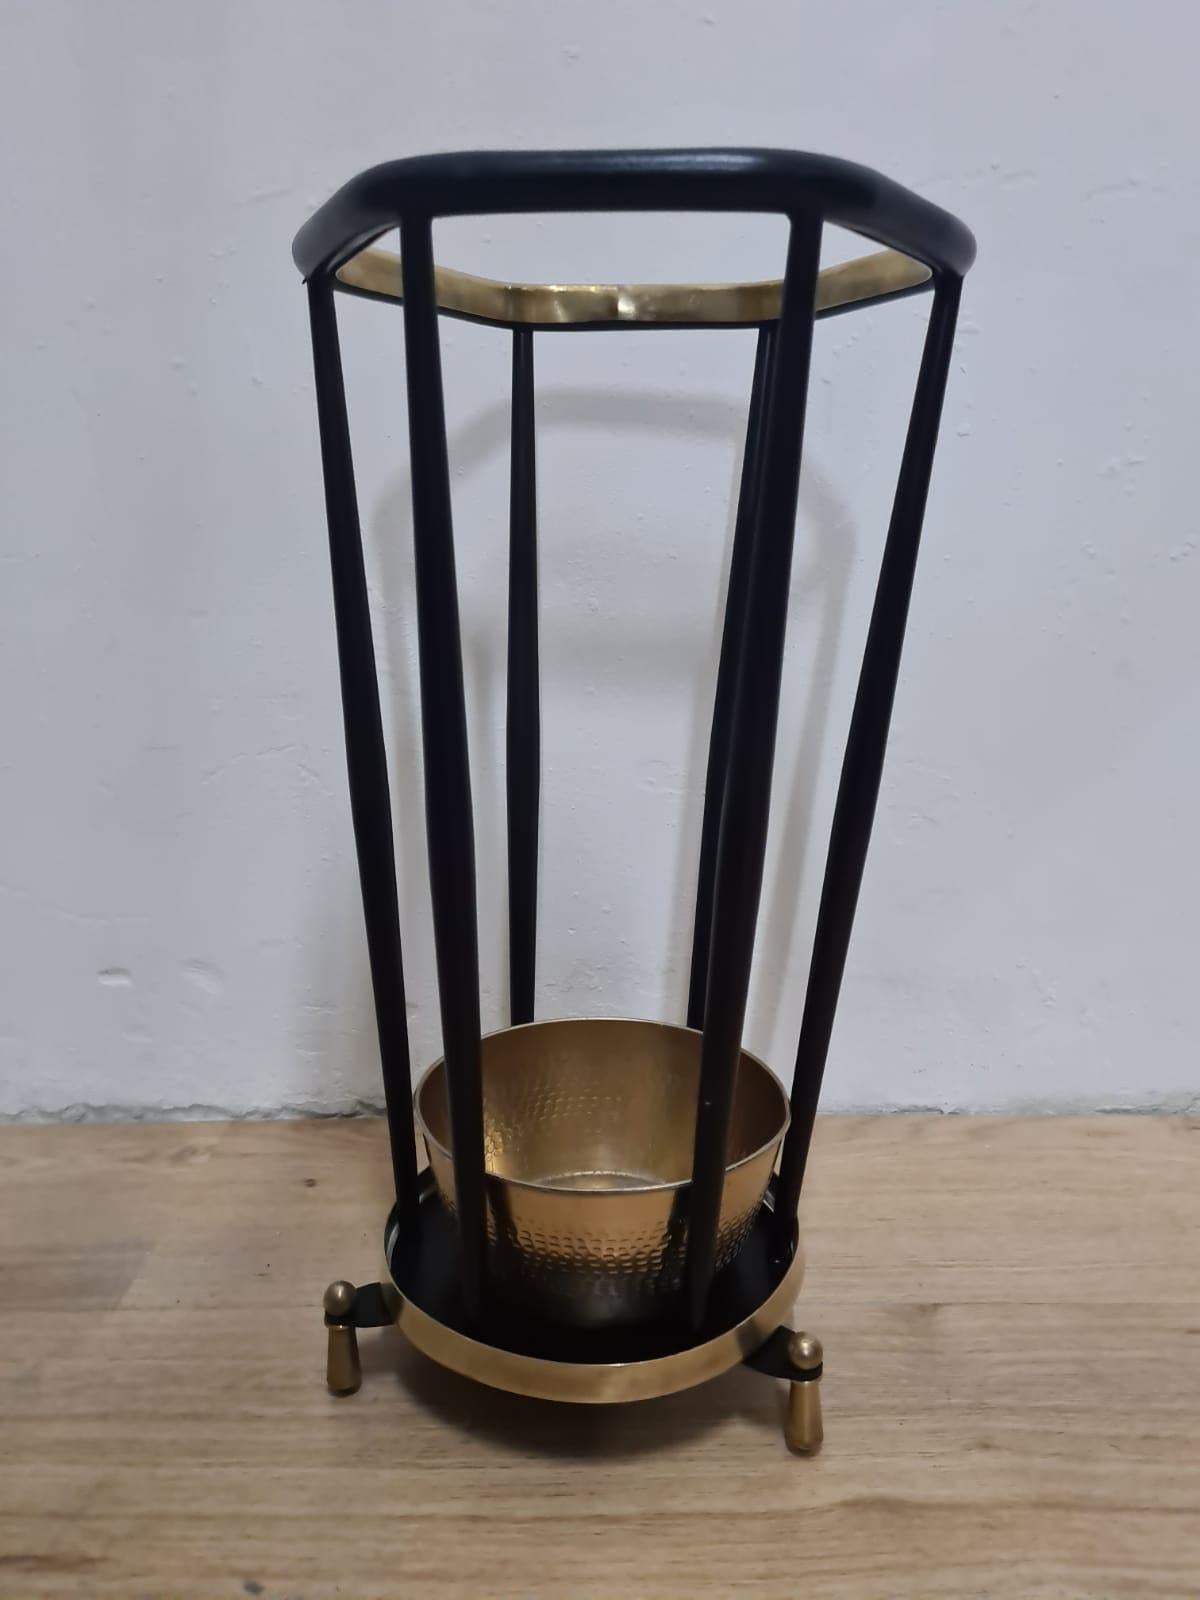 Italian iron and brass umbrella stand from the 1960s.